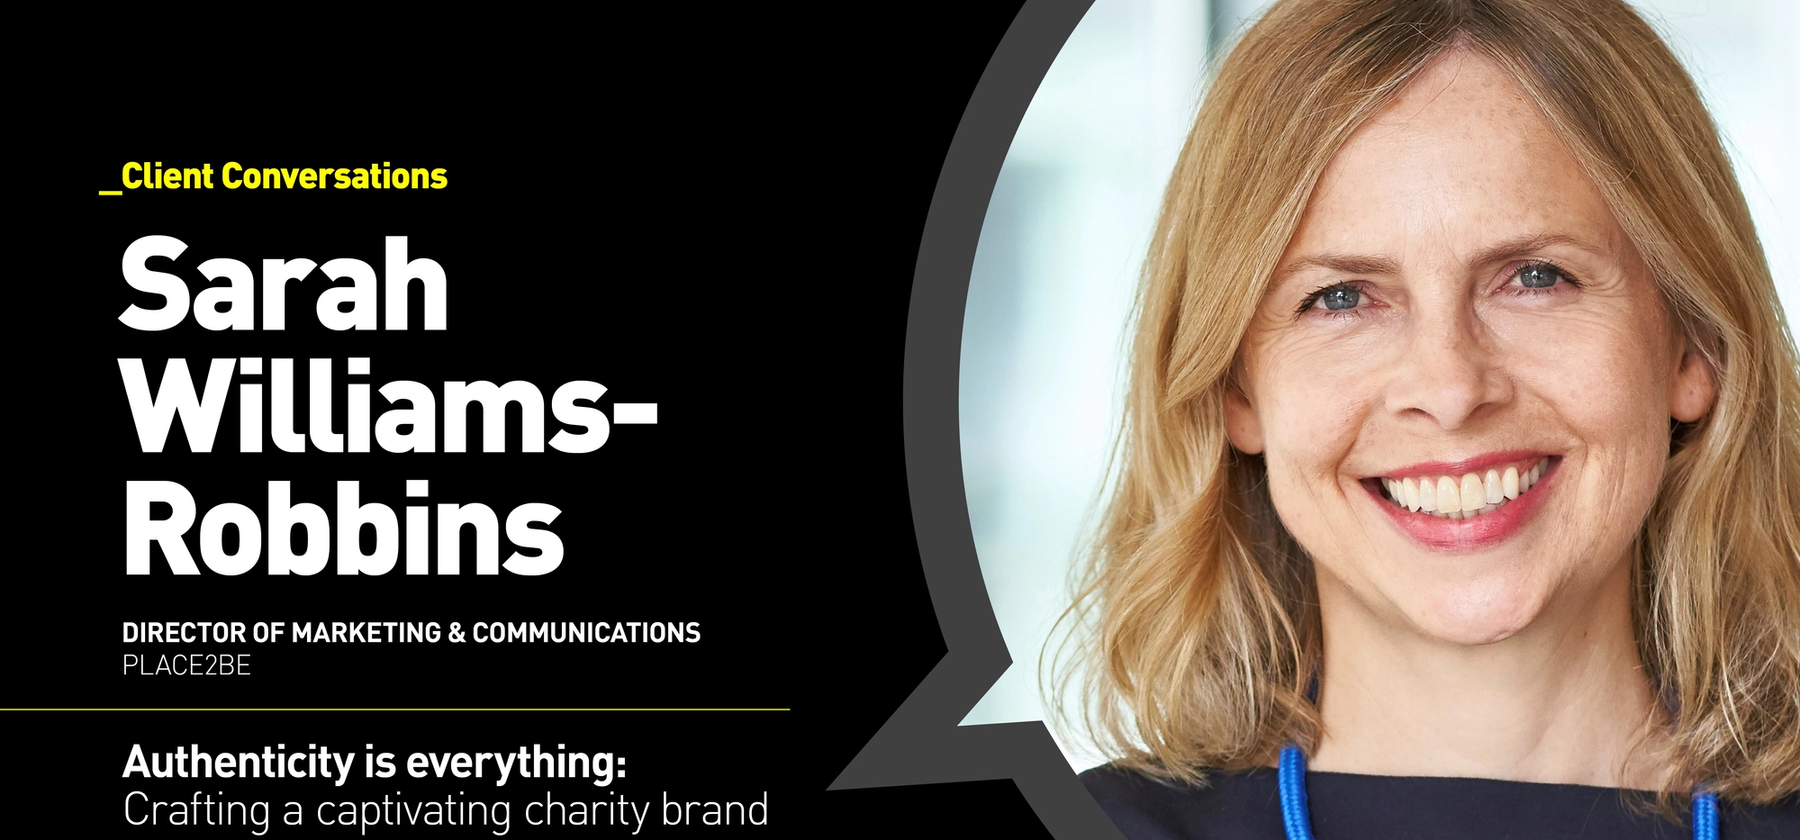 psLondon blog | Authenticity is everything: crafting a captivating charity brand with Sarah Williams, Director of Marketing & Communications 